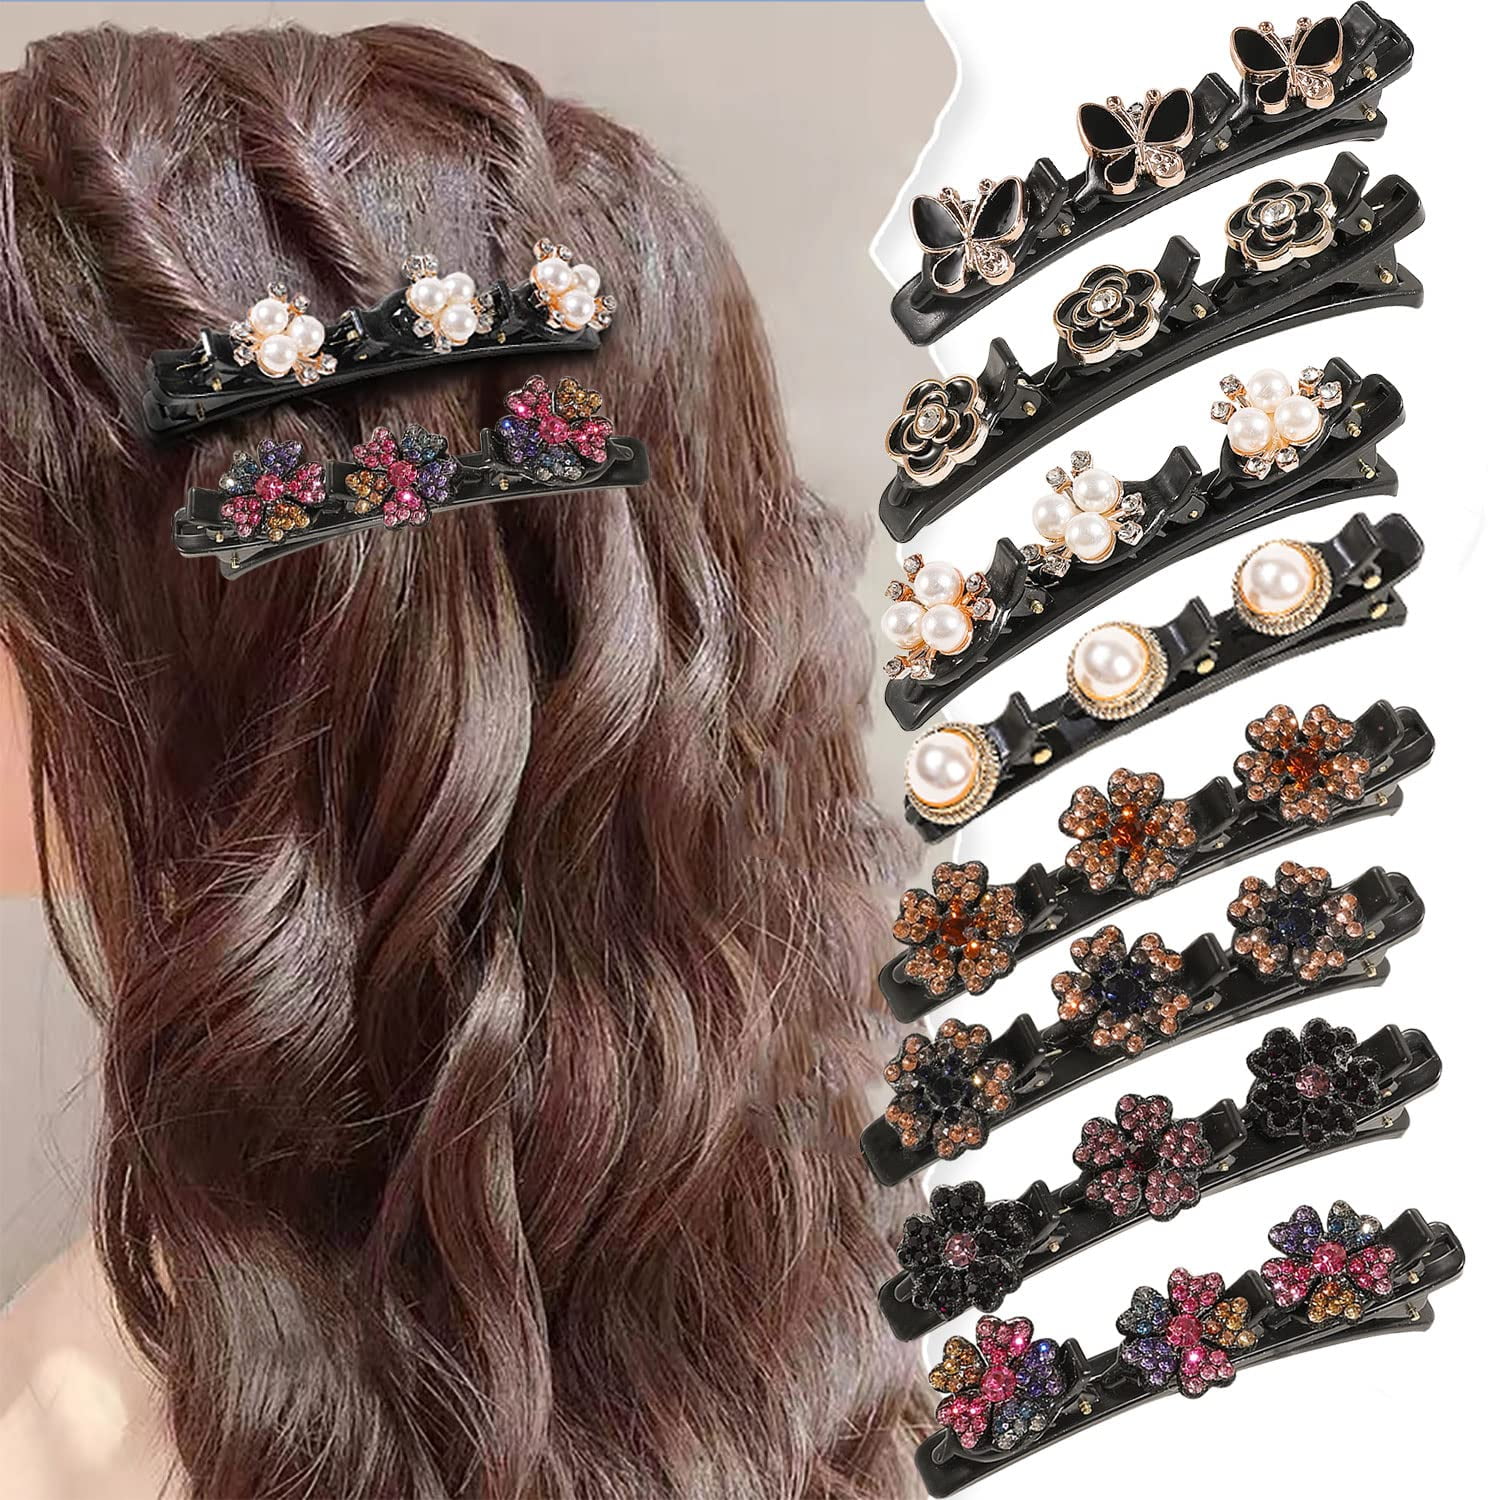 Pompotops Braided Hair Clips with 3 Small Clips for Women Girls Cute Pearl Braided Hair Barrettes Hair Accessories, Women's